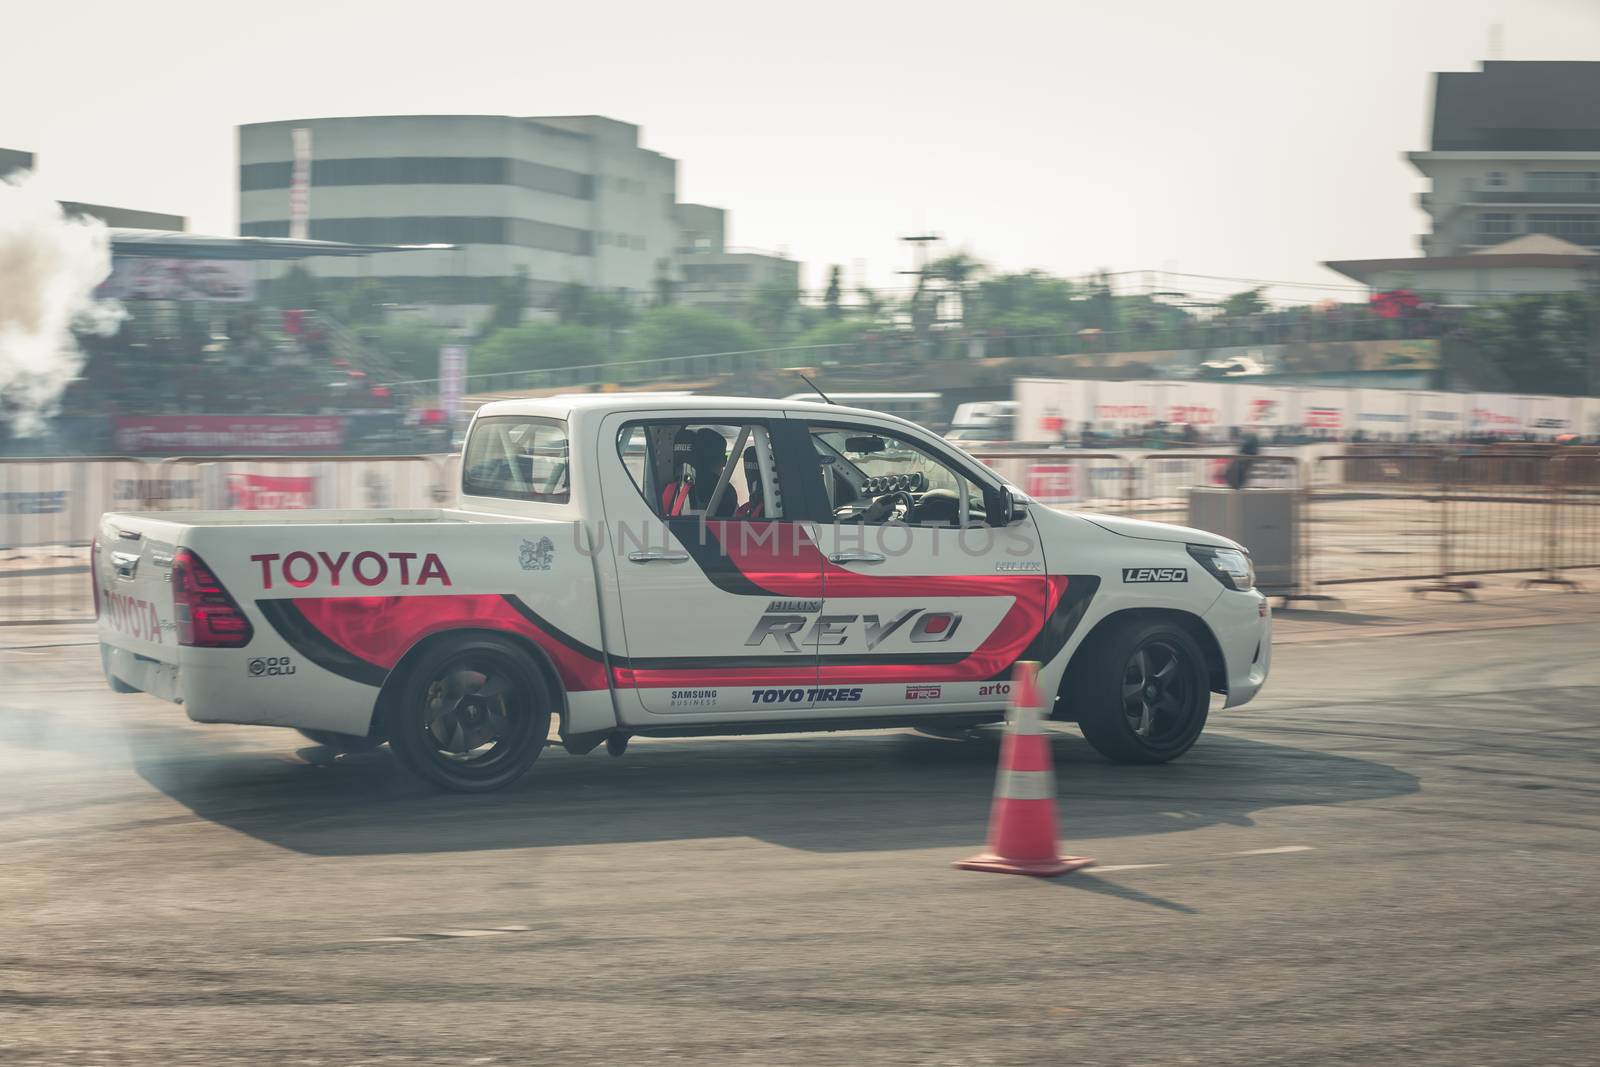 Udon Thani, Thailand - October 18, 2015: Toyota Hilux Revo perform drifting contest on the track between driver from Thailand and Japan at the event Toyota Motor Sport show at Udon Thani, Thailand with motion blur of the background